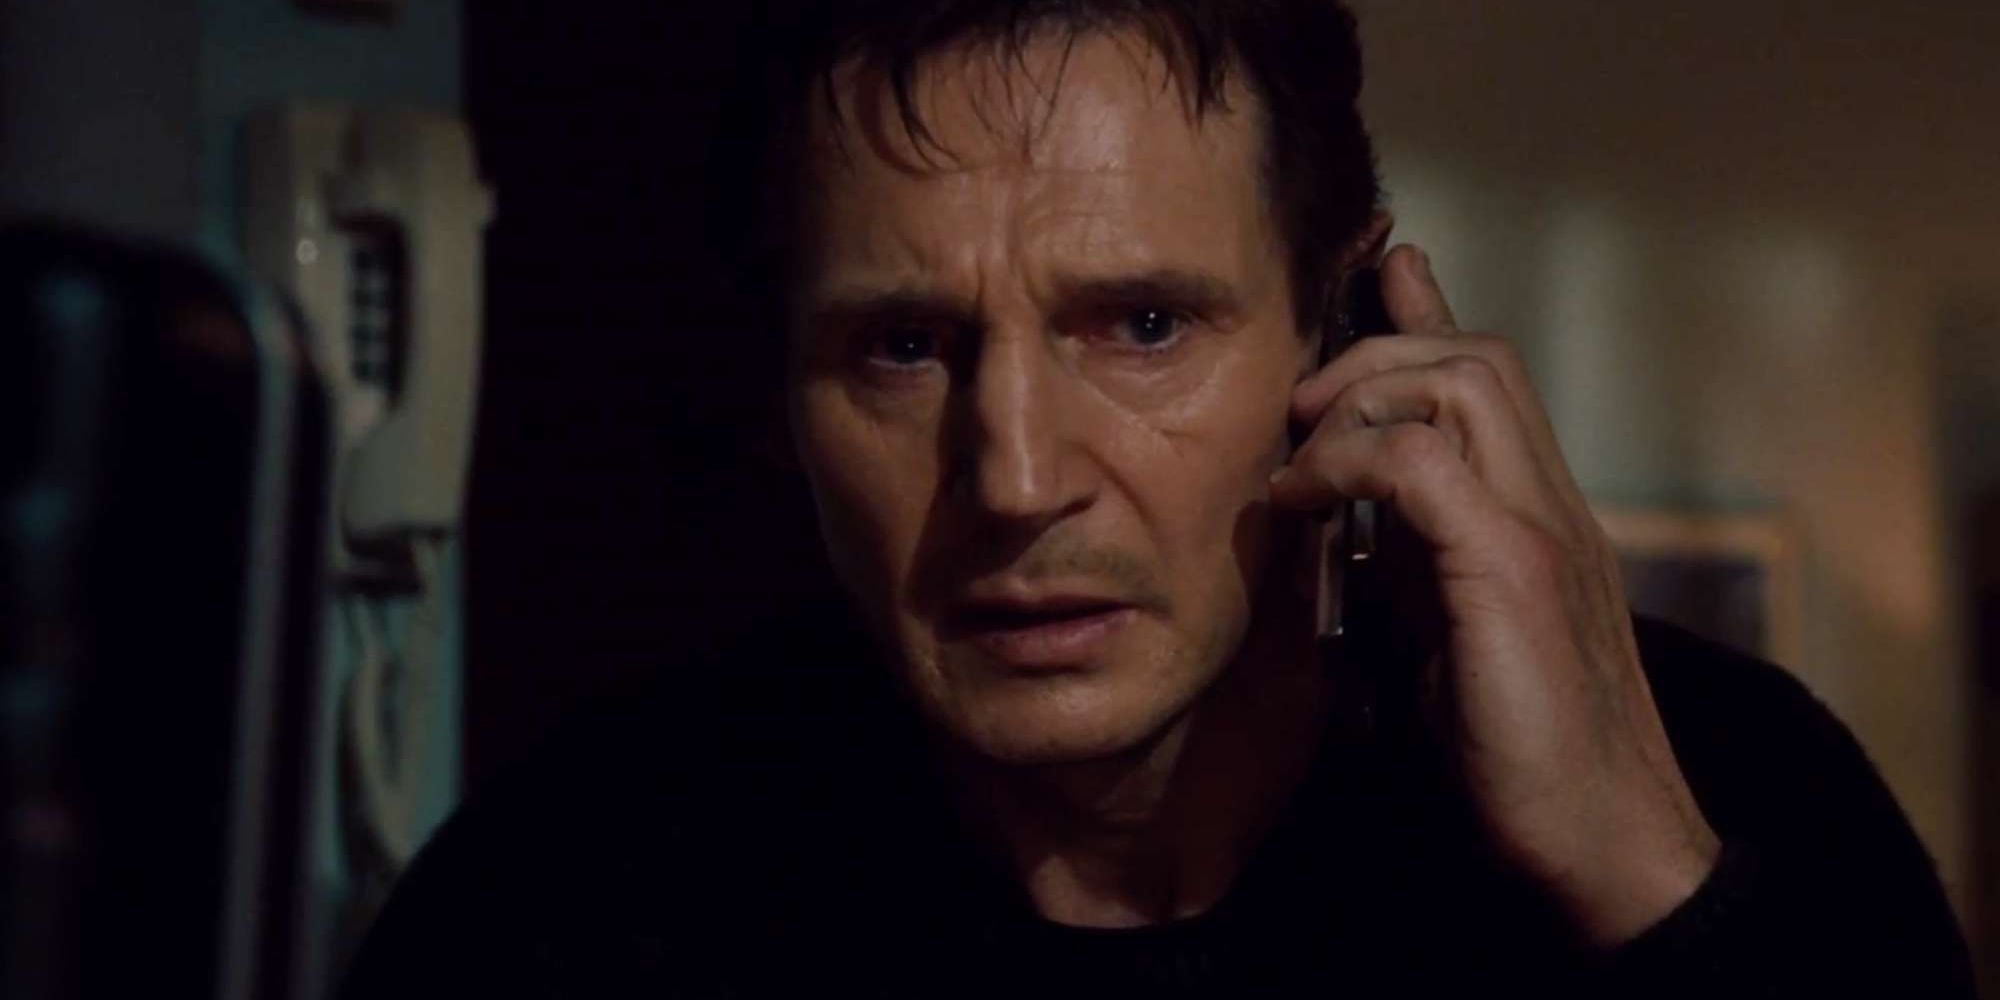 Bryan Mills 'Liam Neeson' on the phone with his daughter's kidnappers in 'Taken' (2008)